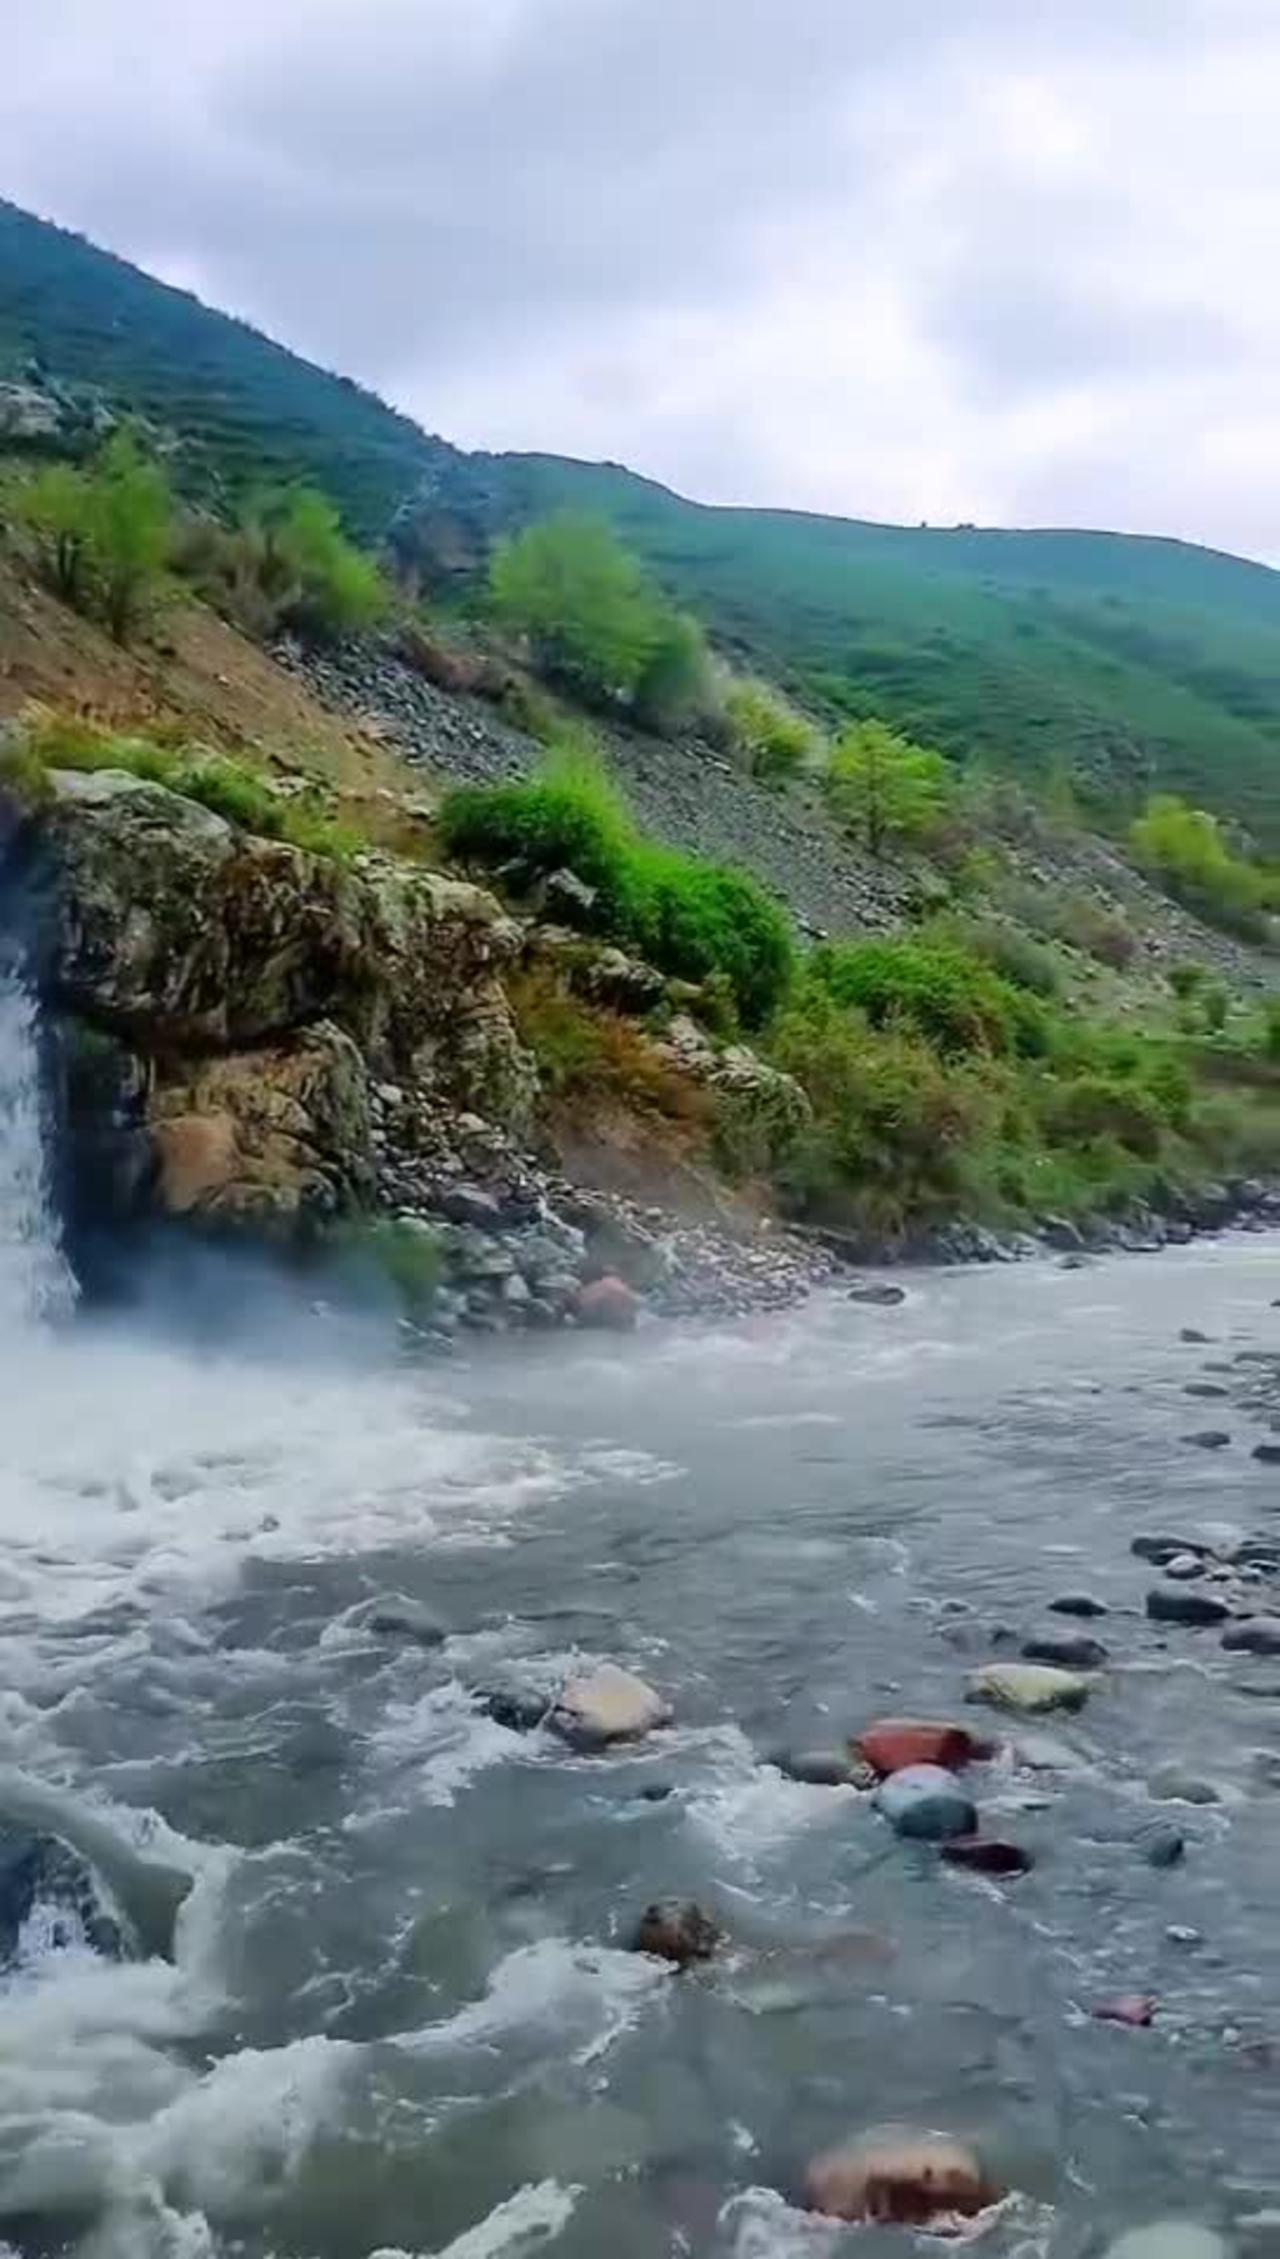 Is that a waterfall?